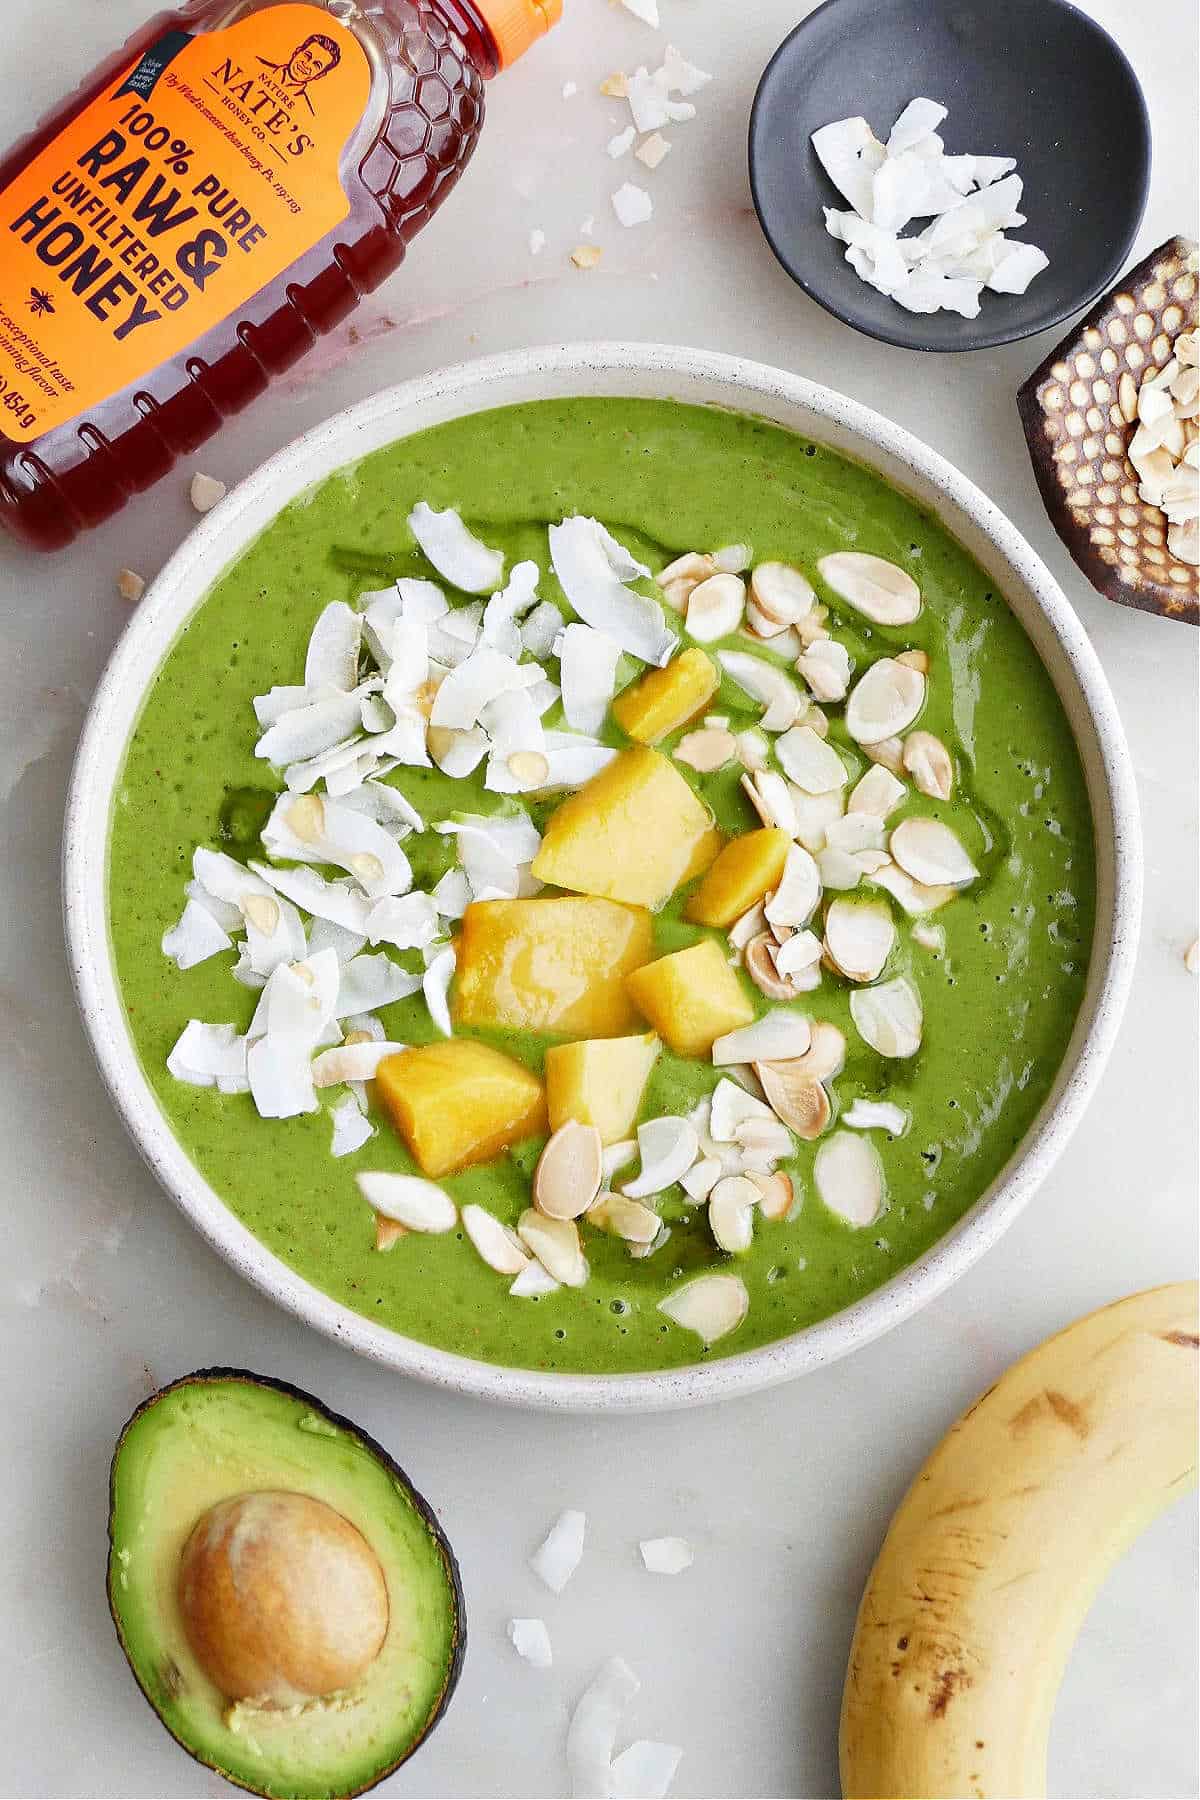 mango kale smoothie bowl topped with coconut, mango, and almonds surrounded by ingredients